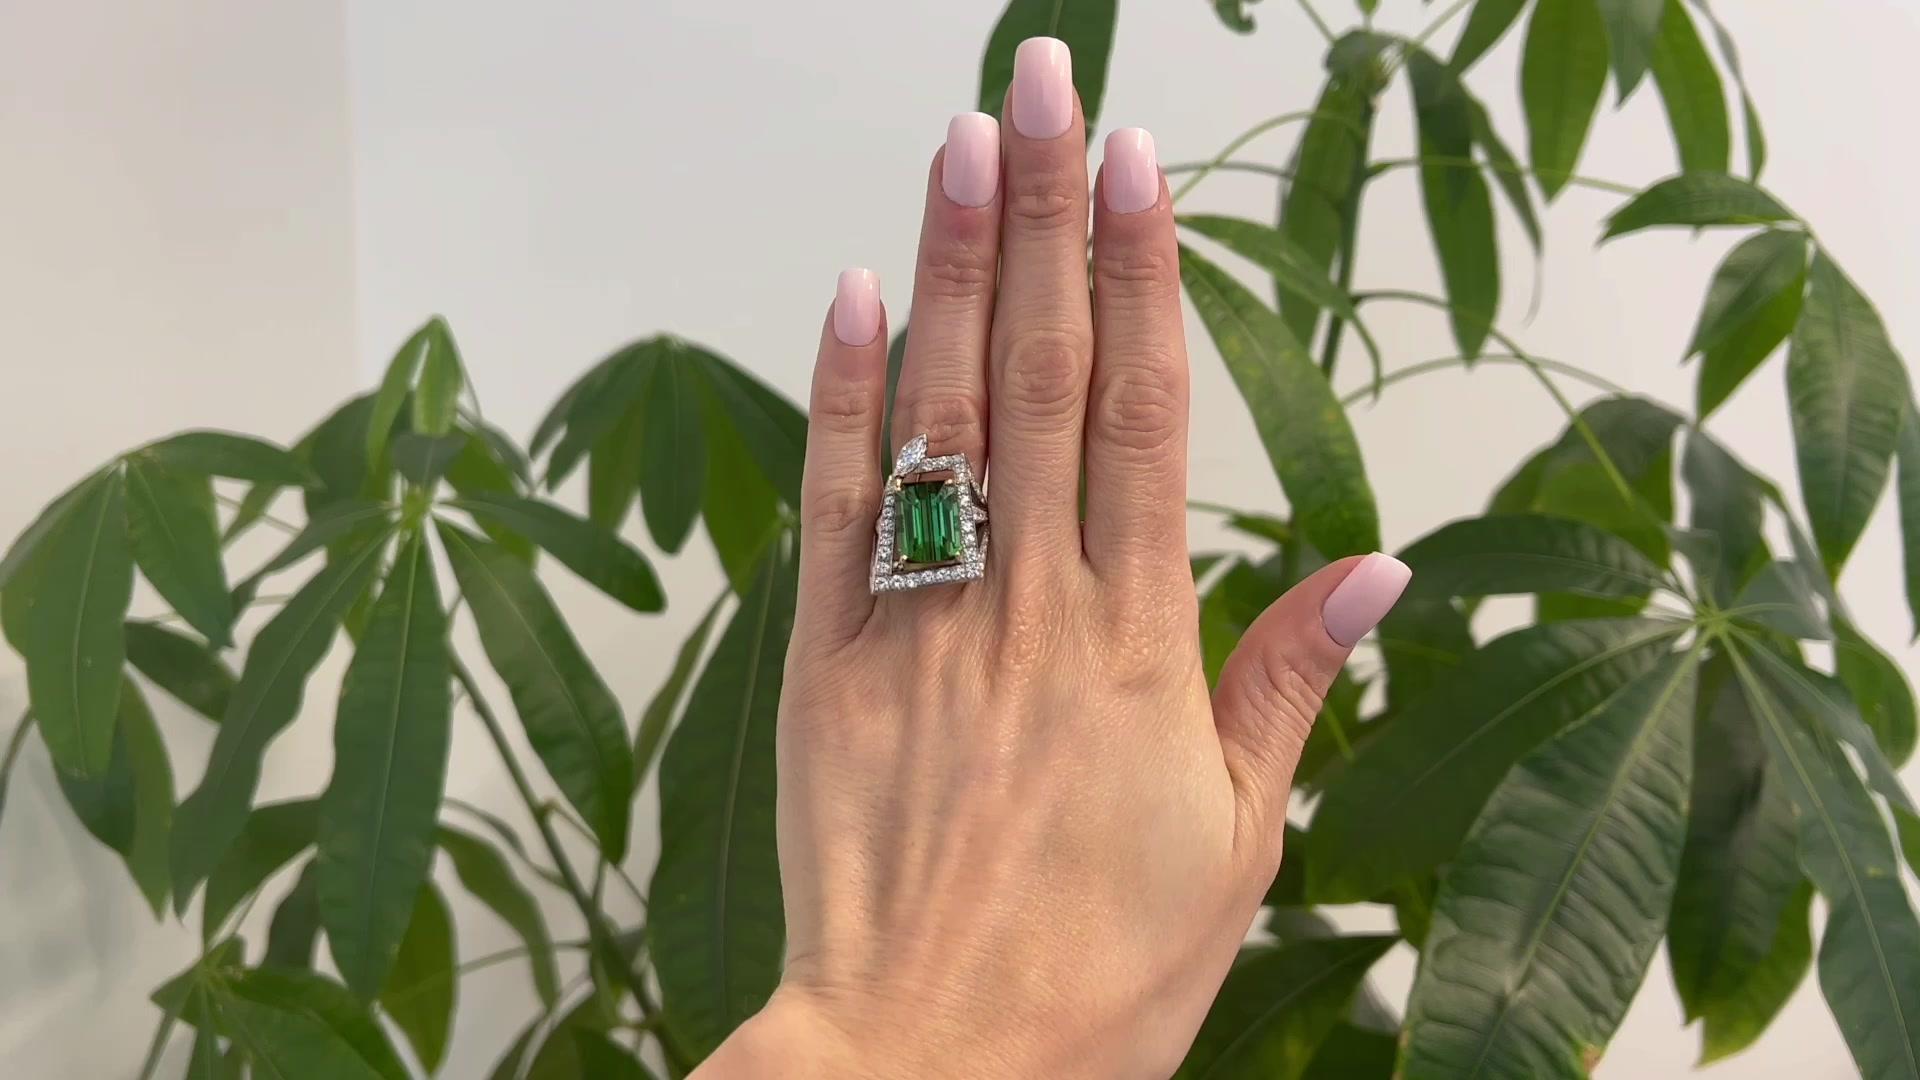 One Vintage 12.86 Carats Green Tourmaline Diamond 14k Two Tone Gold Cocktail Ring. Featuring one octagonal step cut green tourmaline of 12.86 carats. Accented by one marquise cut and 53 round brilliant diamonds with a total weight of approximately